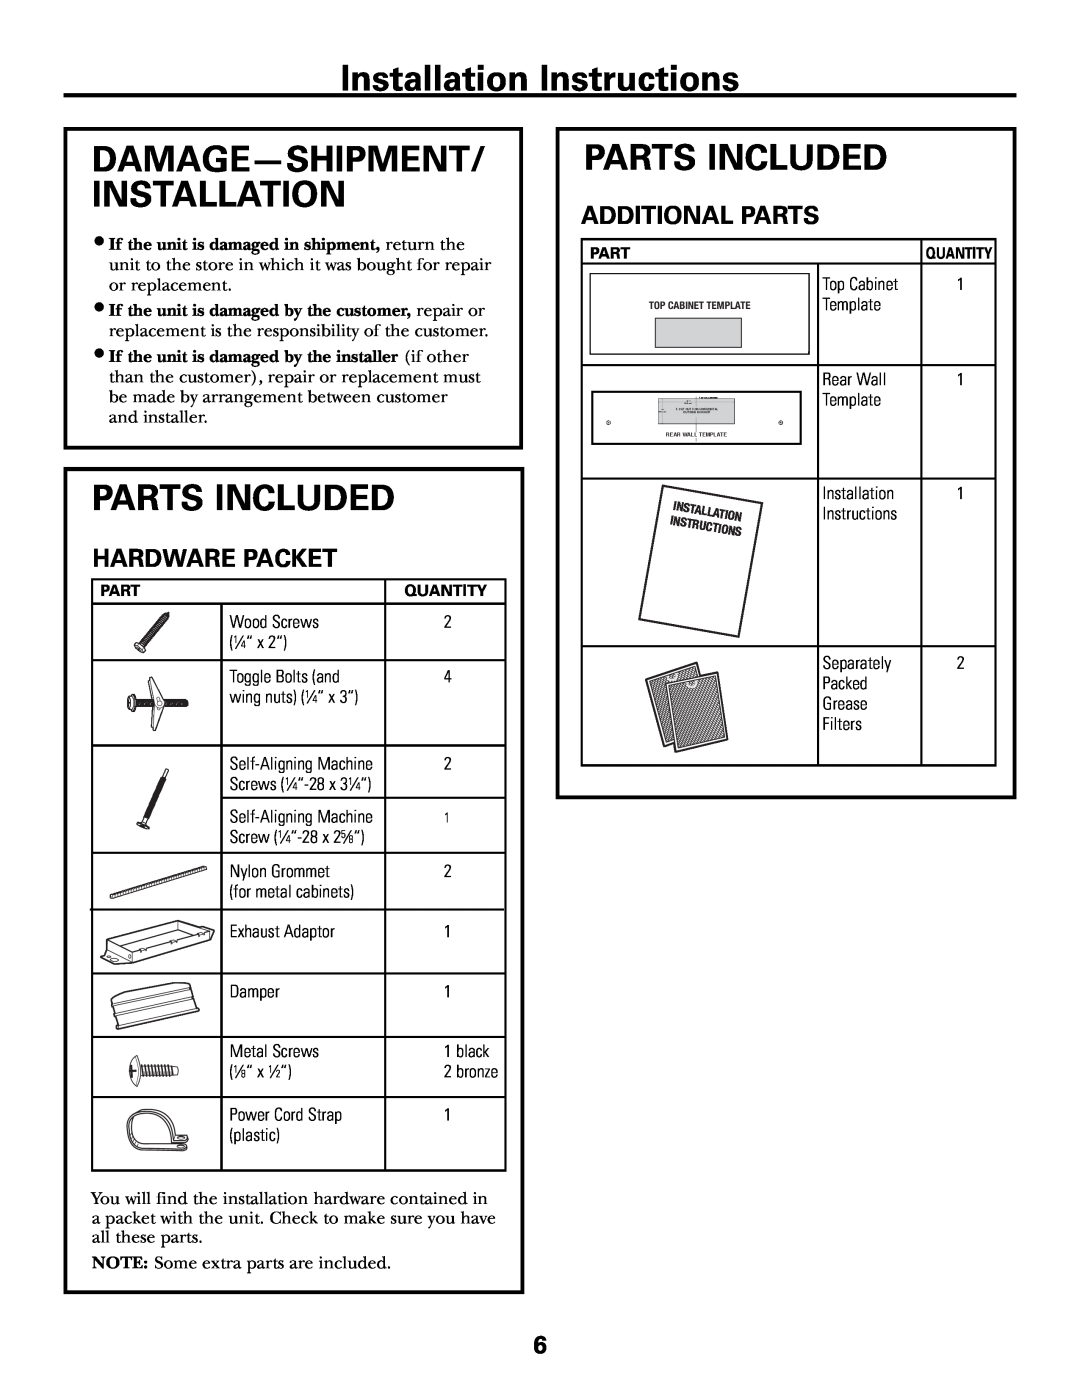 GE JVM1790 Damage-Shipment/ Installation, Parts Included, Additional Parts, Hardware Packet, Installation Instructions 